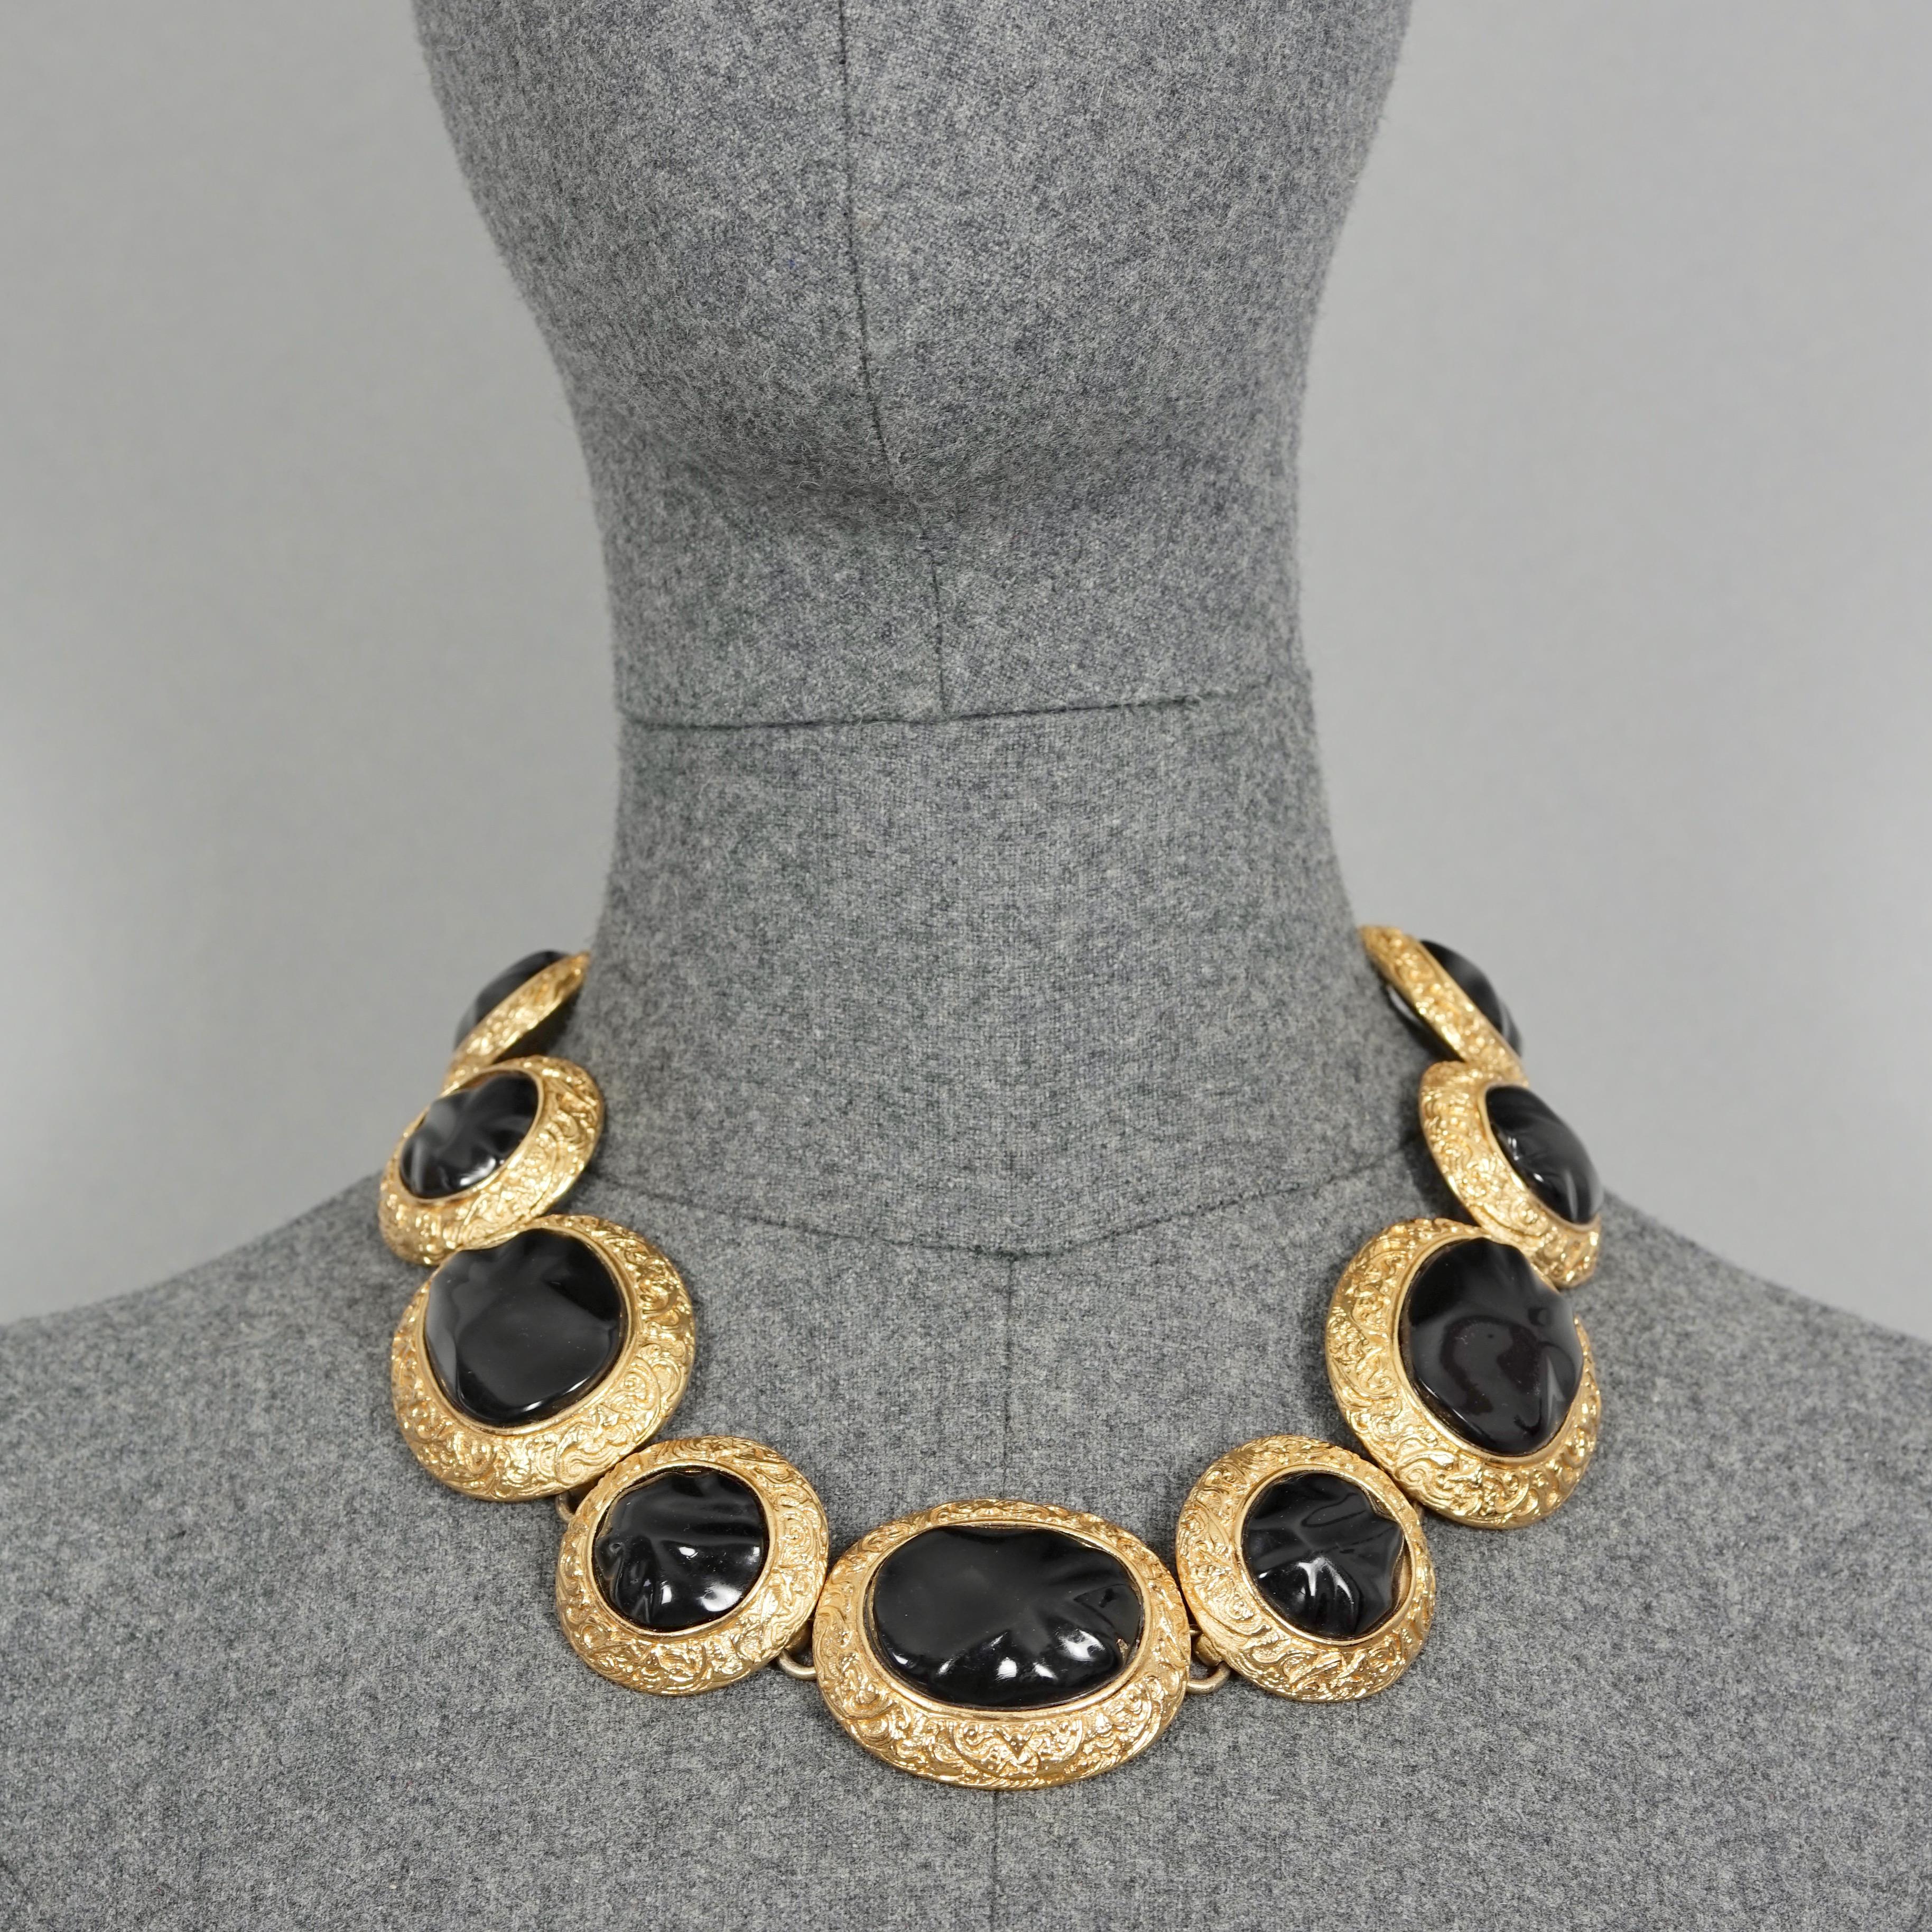 Vintage YVES SAINT LAURENT Ysl Byzantine Black Cabochon Link Necklace

Measurements:
Height: 1.69 inches (4.3 cm)
Wearable Length: 18.89 inches to 20.86 inches (48 cm to 53 cm) 

Features:
- 100% Authentic YVES SAINT LAURENT by Robert Goossens.
-